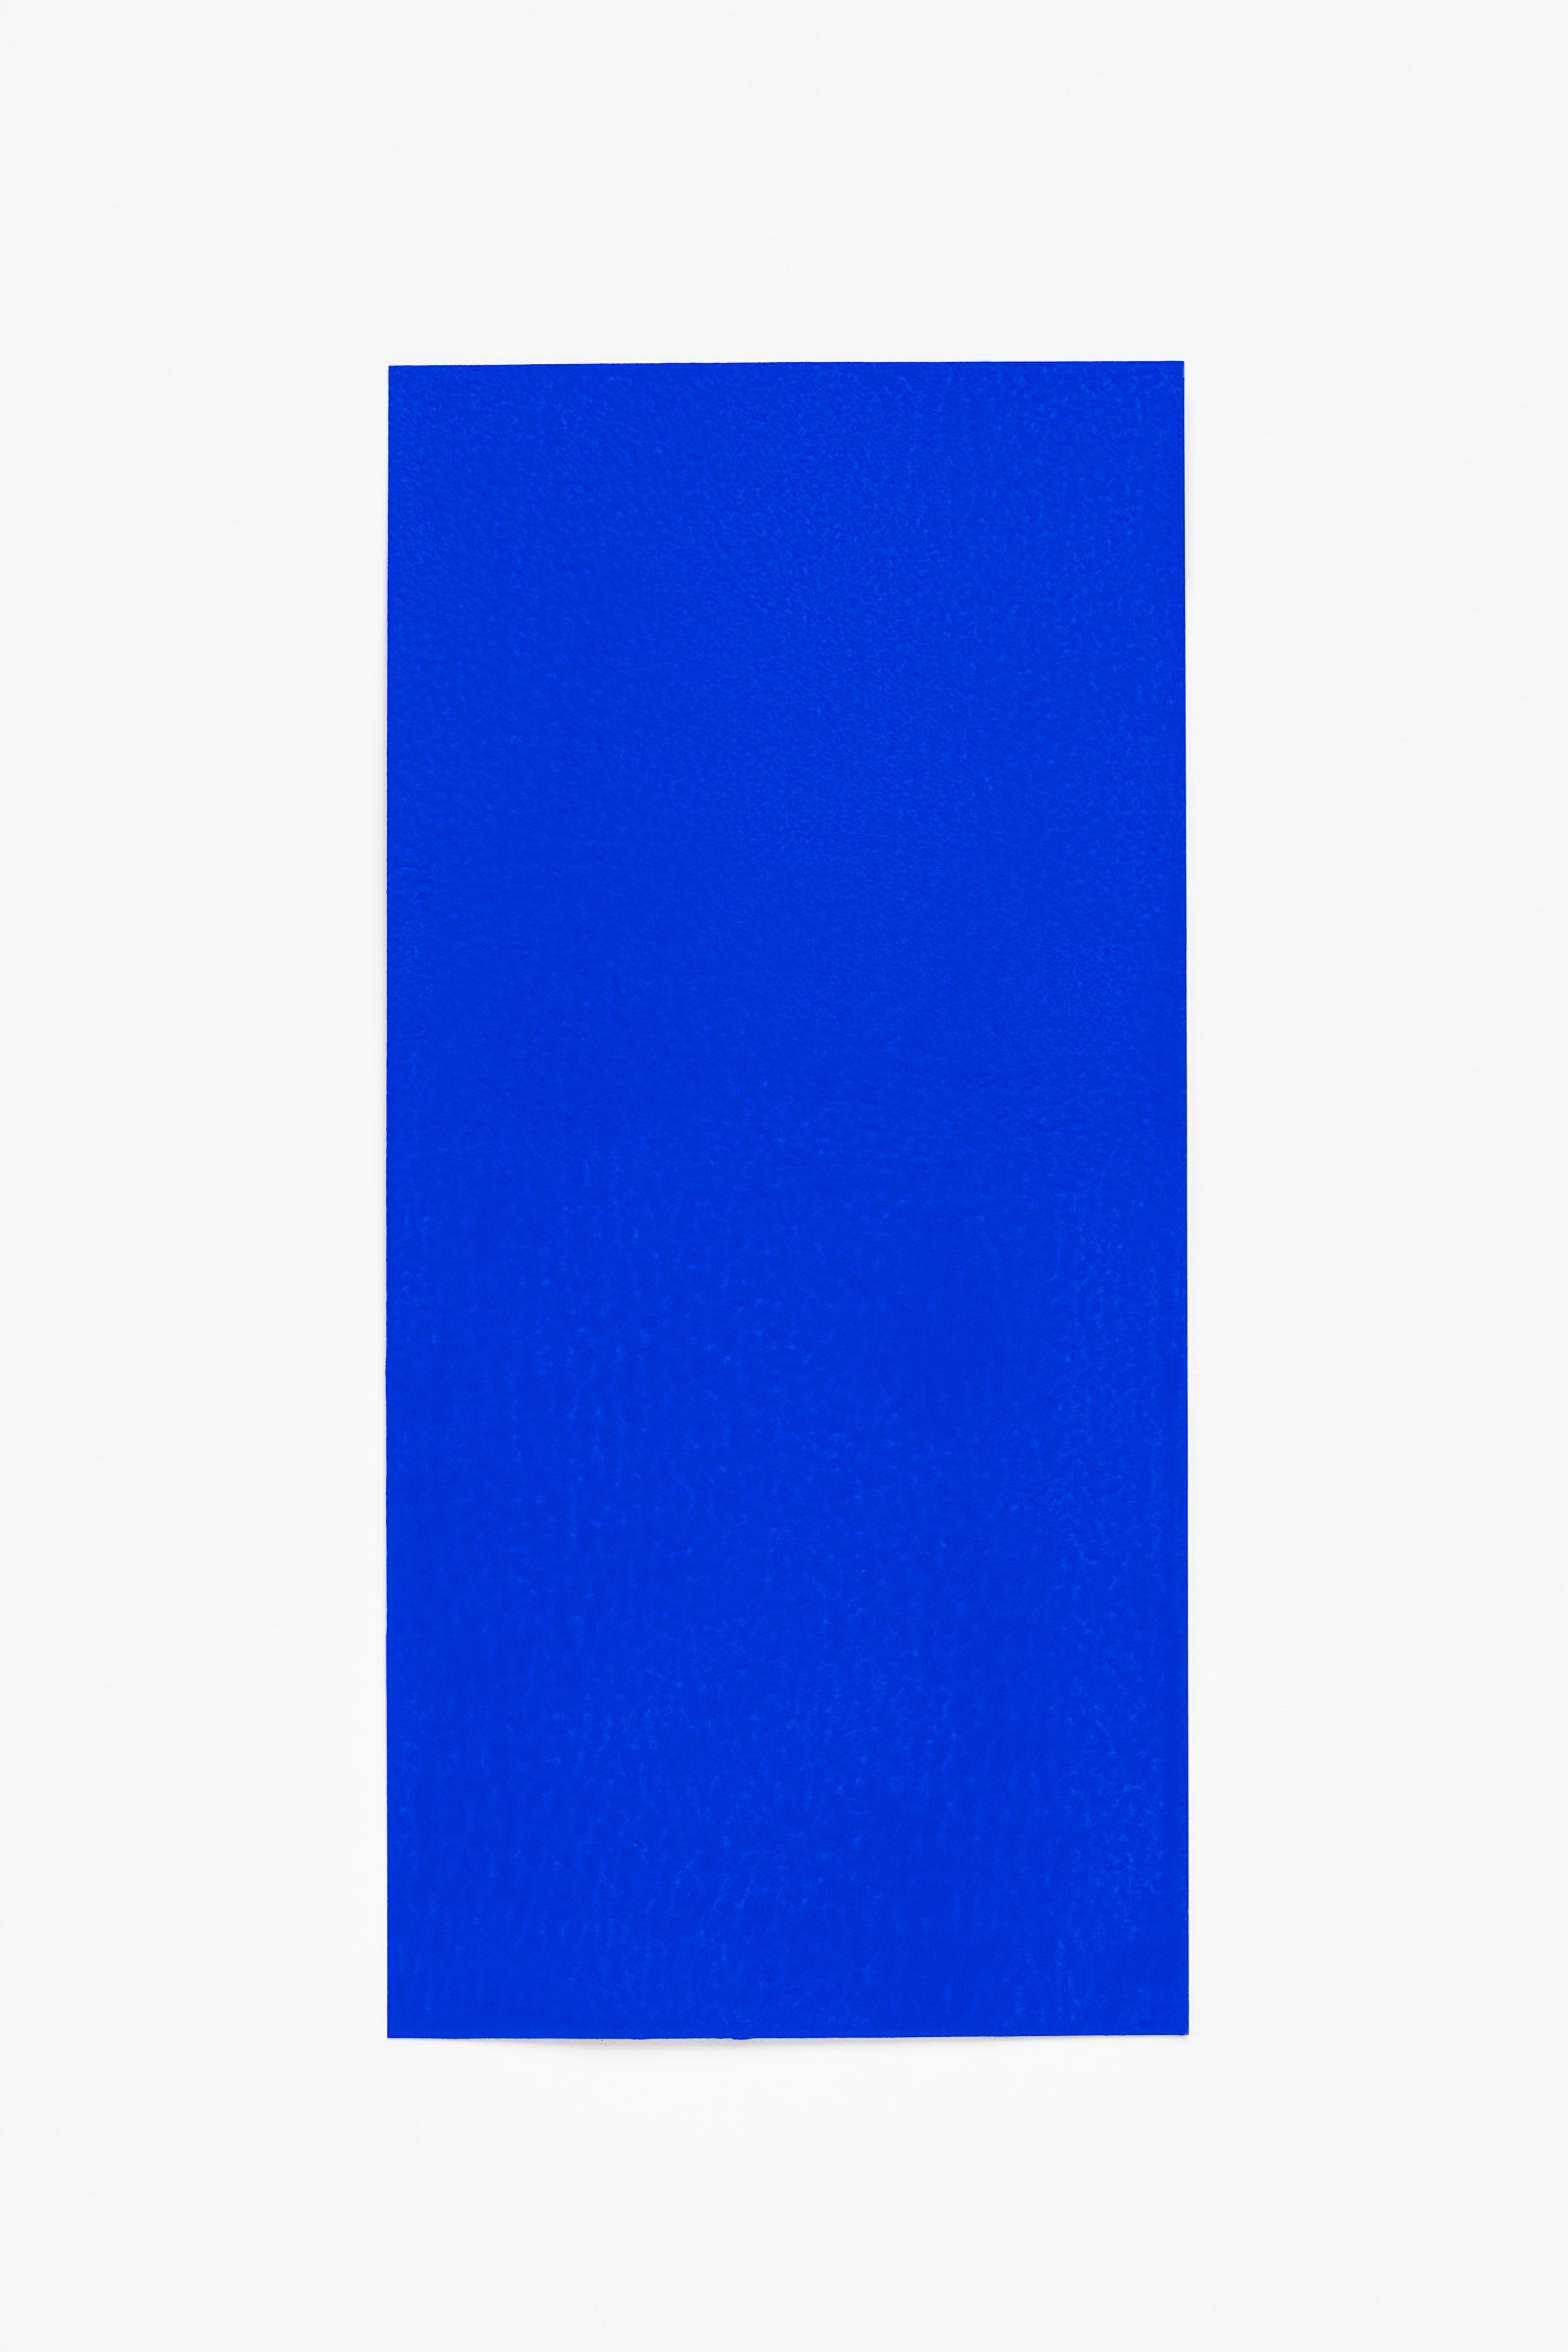 Ultramarine — a paint colour developed by Barber Osgerby for Blēo